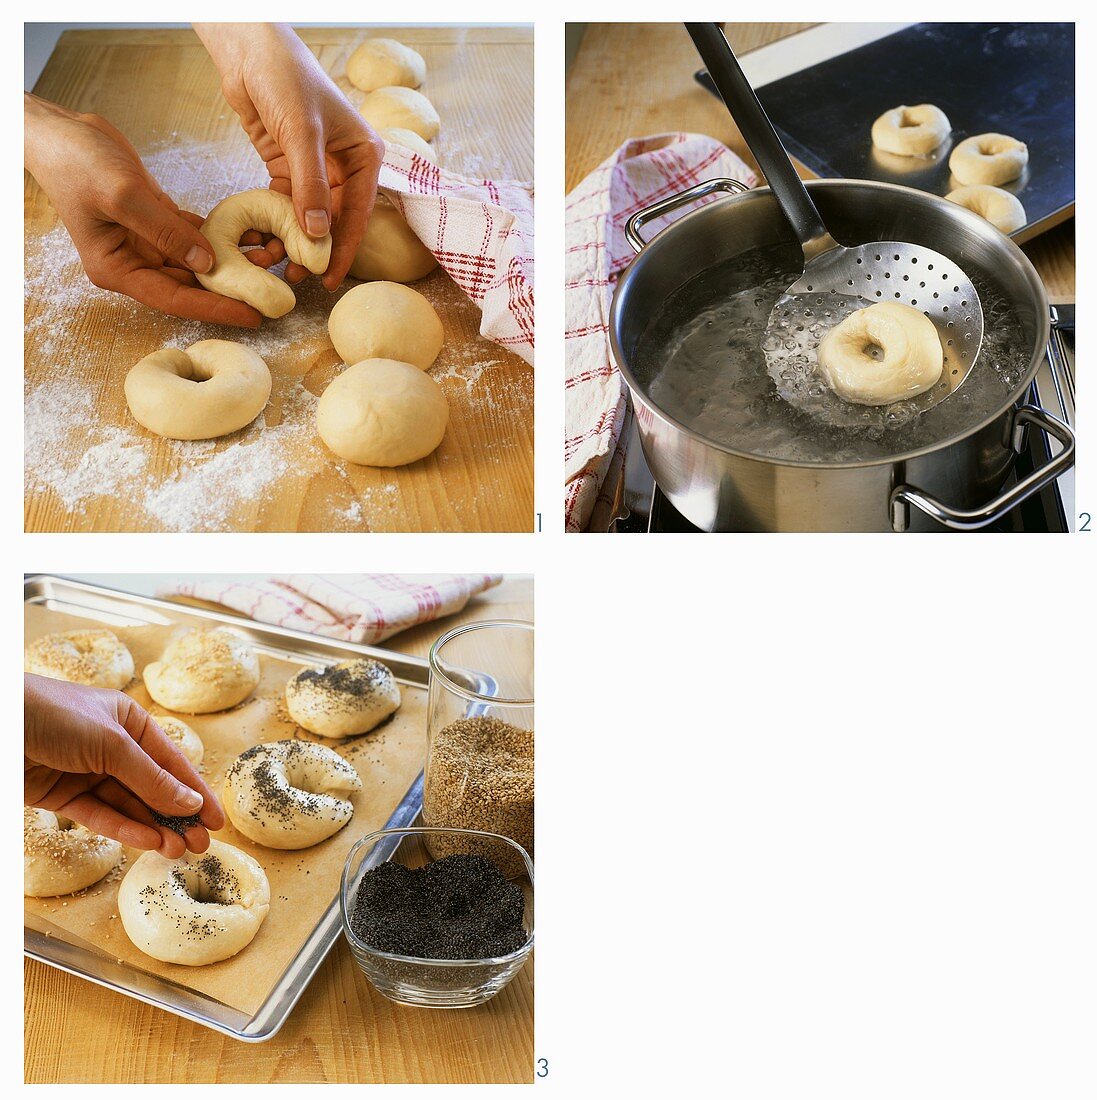 Shaping bagels, precooking and sprinkling with poppy seed